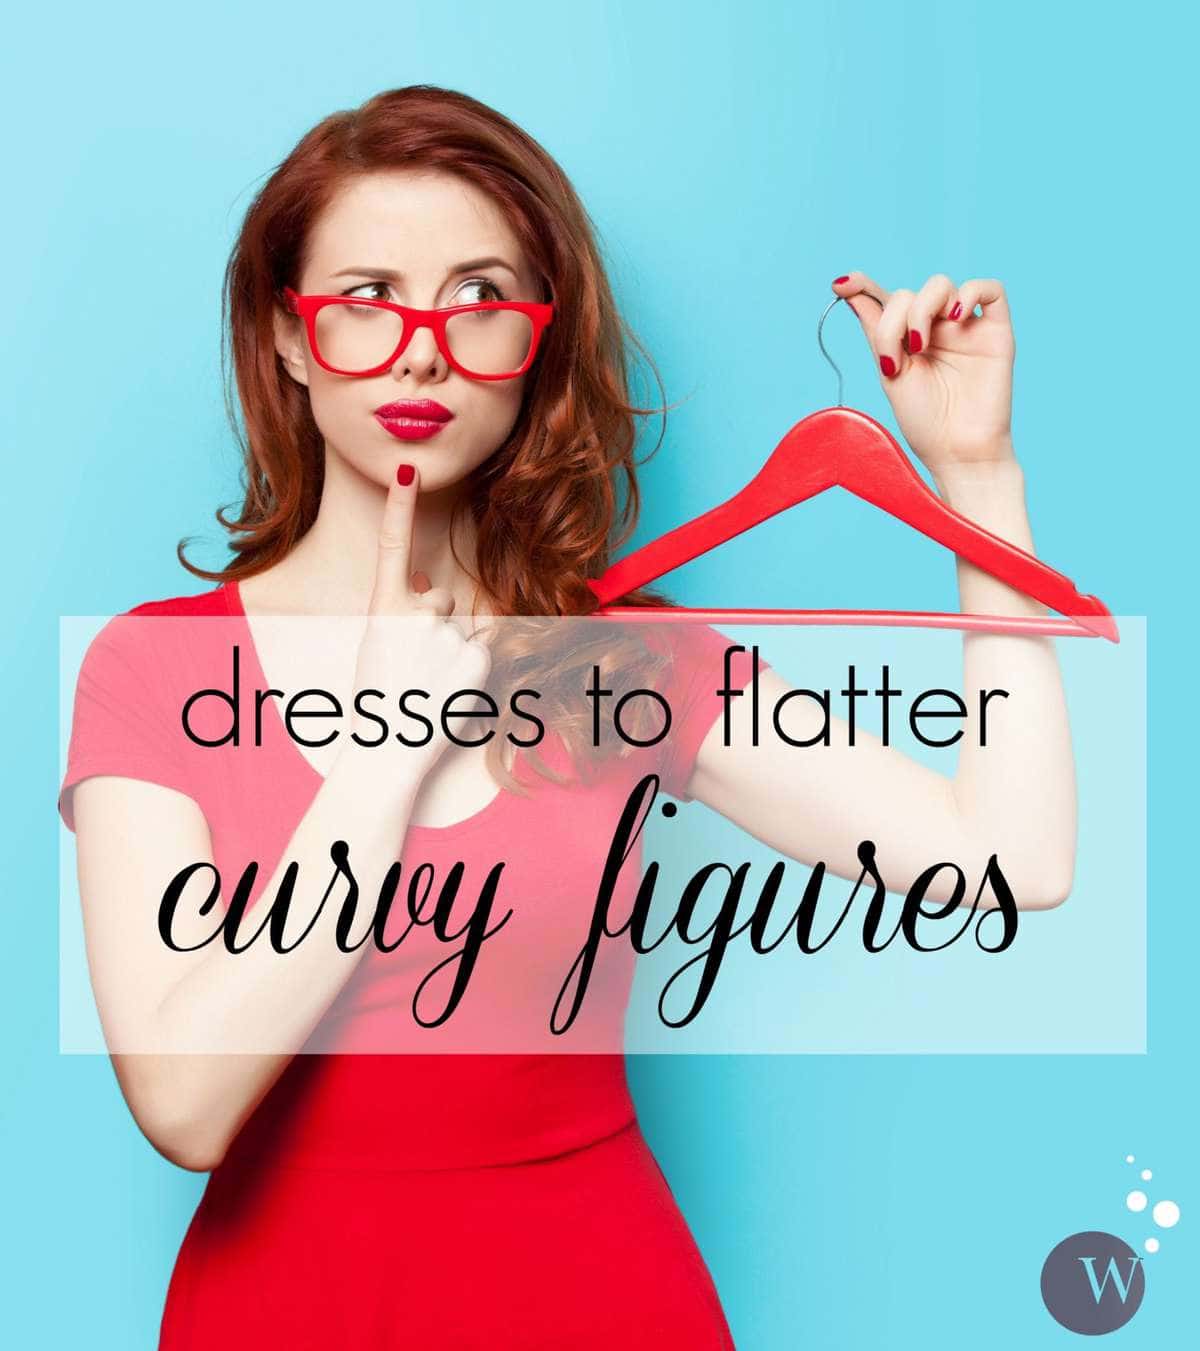 Ask Allie: Holiday Dresses to Flatter a Curvy Figure